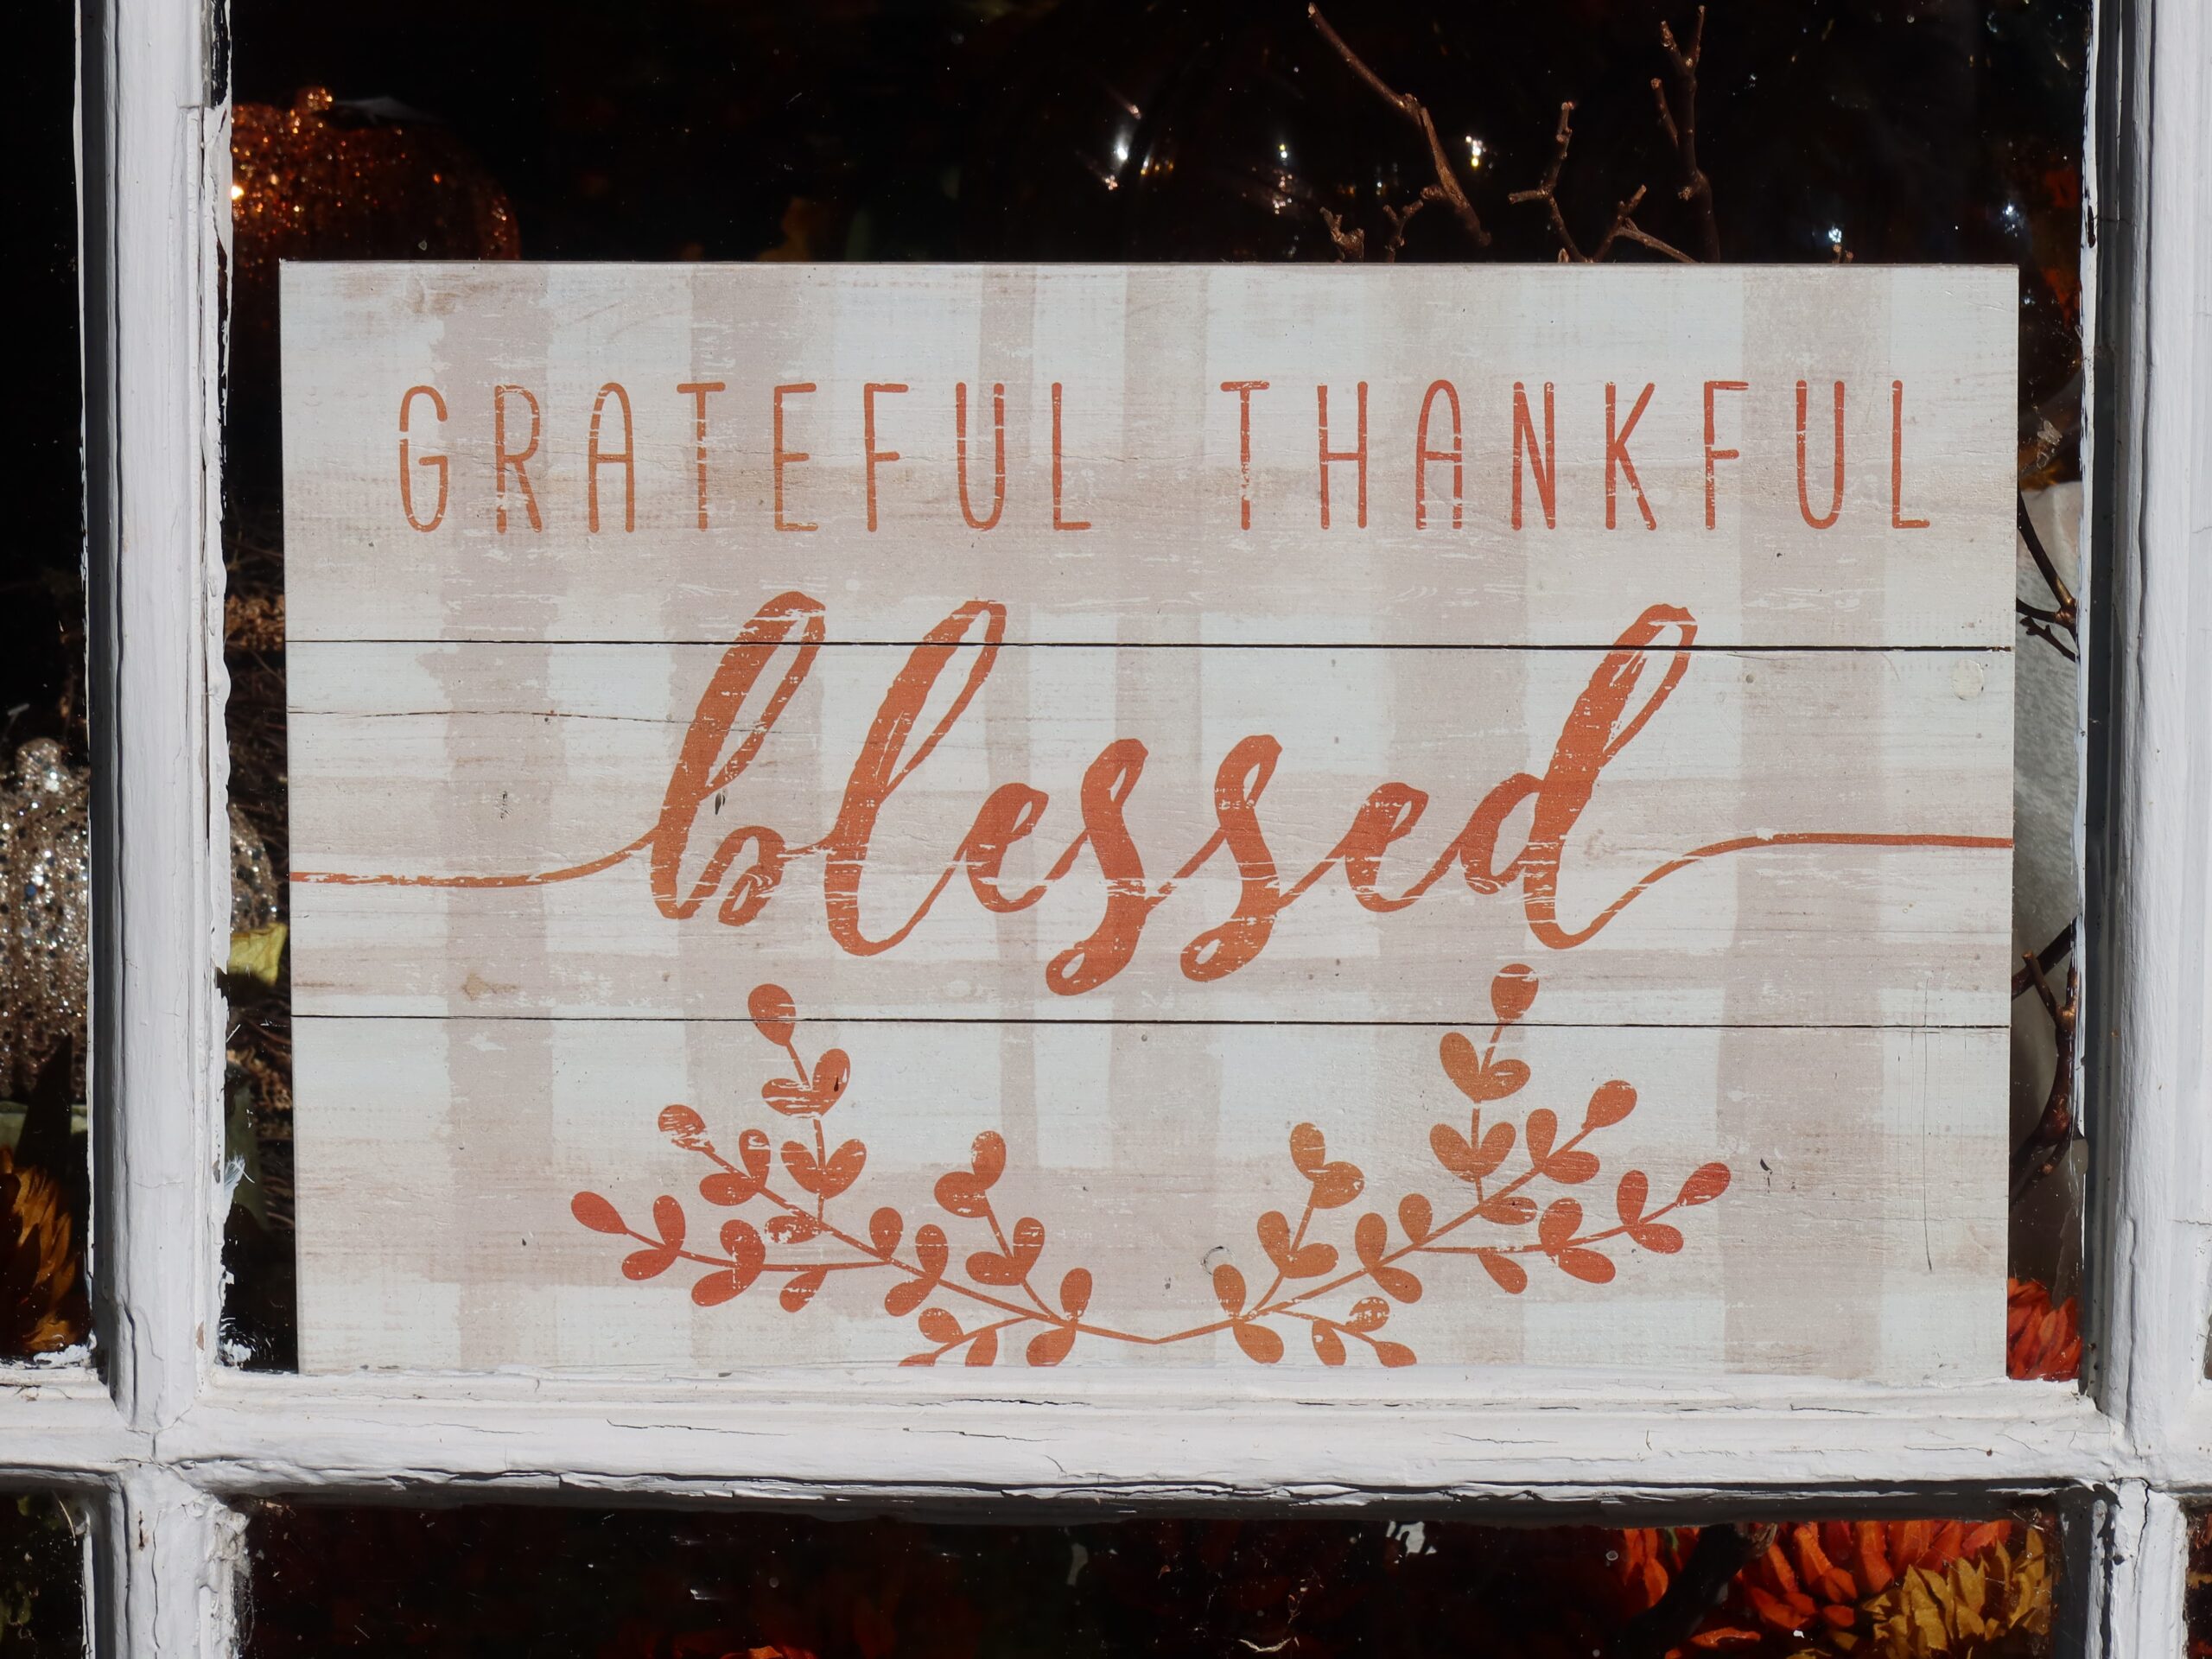 Grateful thankful blessed sign